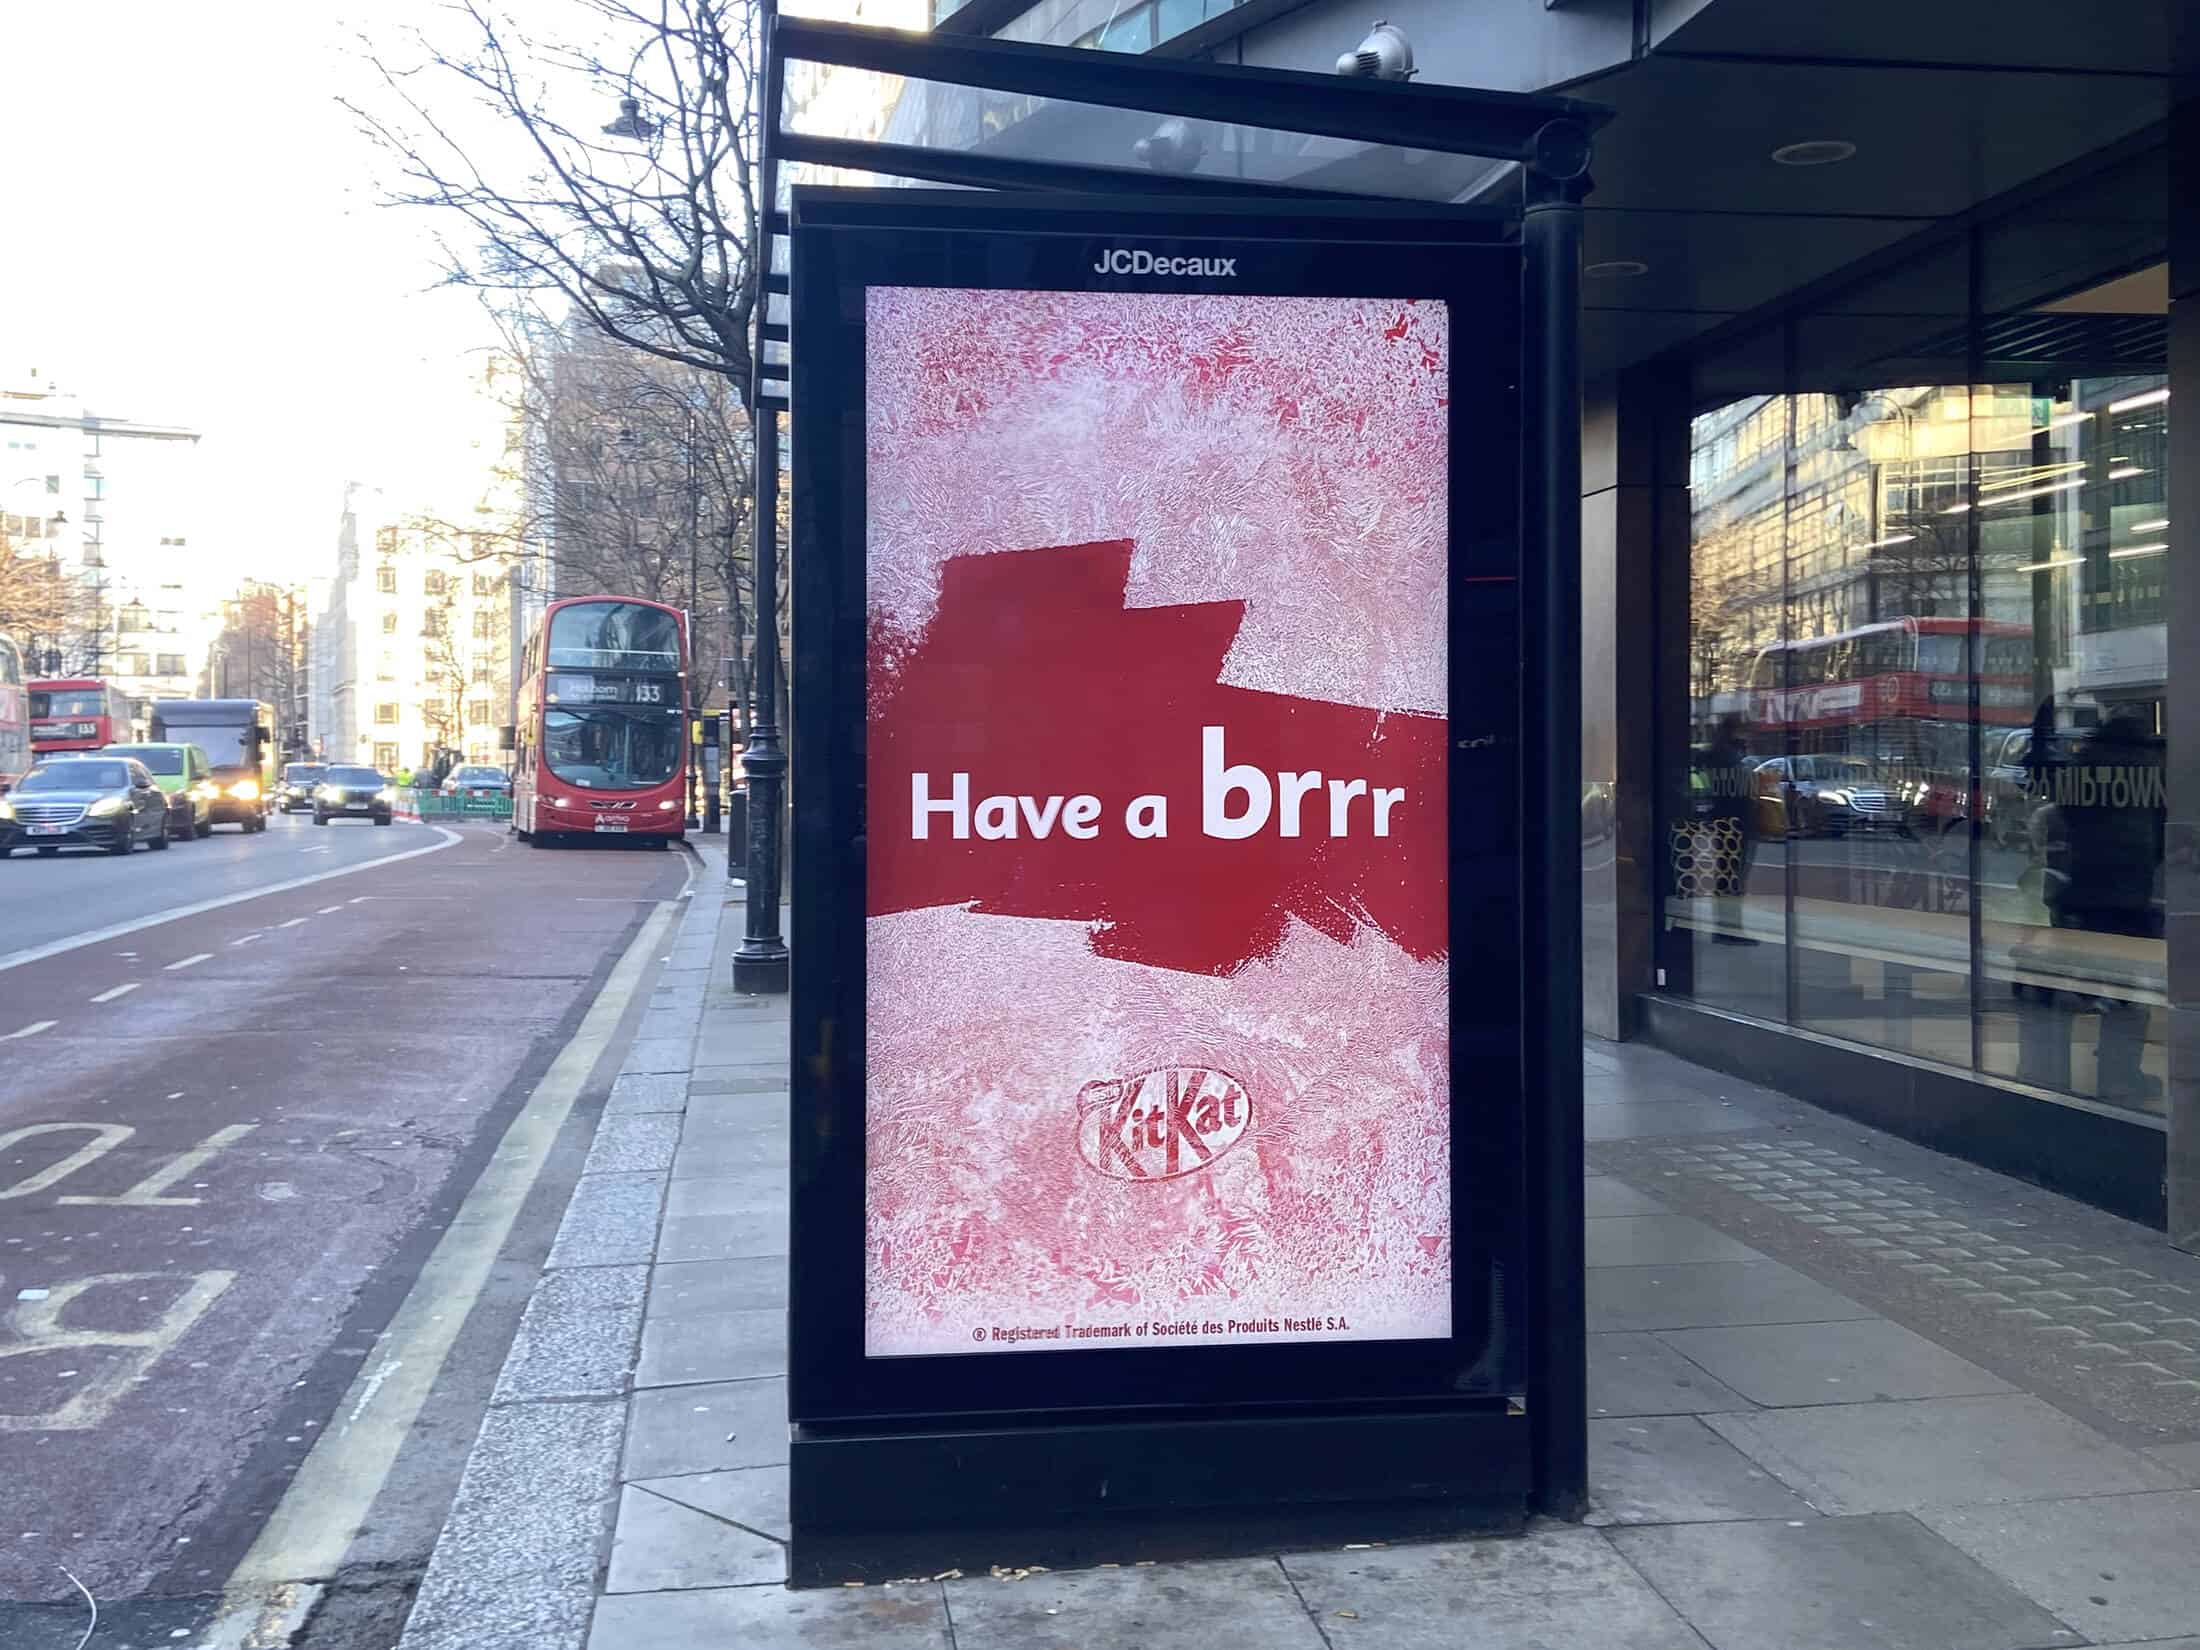 Embracing the Chill: KitKat’s ‘Take a Brrr’ Outdoor Campaign